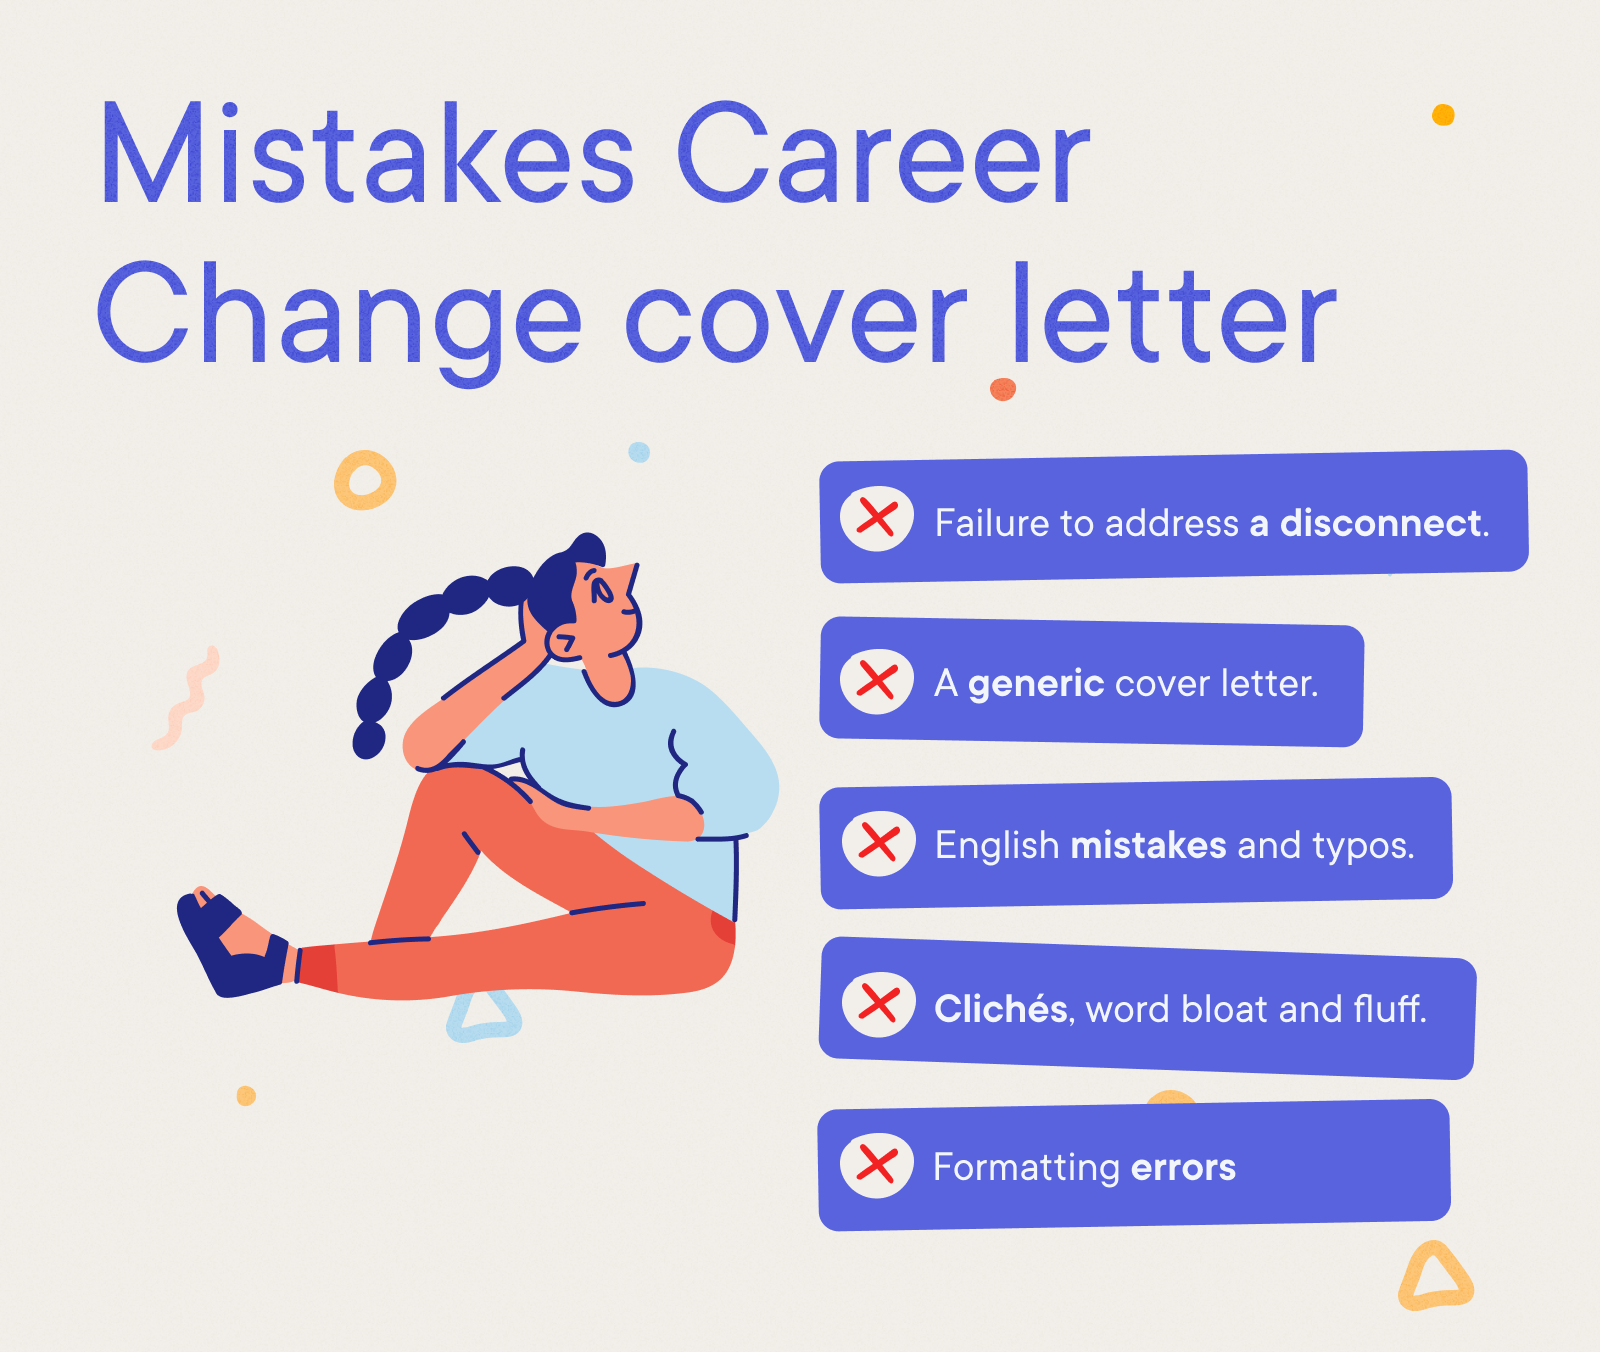 Career Change Cover Letter Example - Mistakes career change cover letter